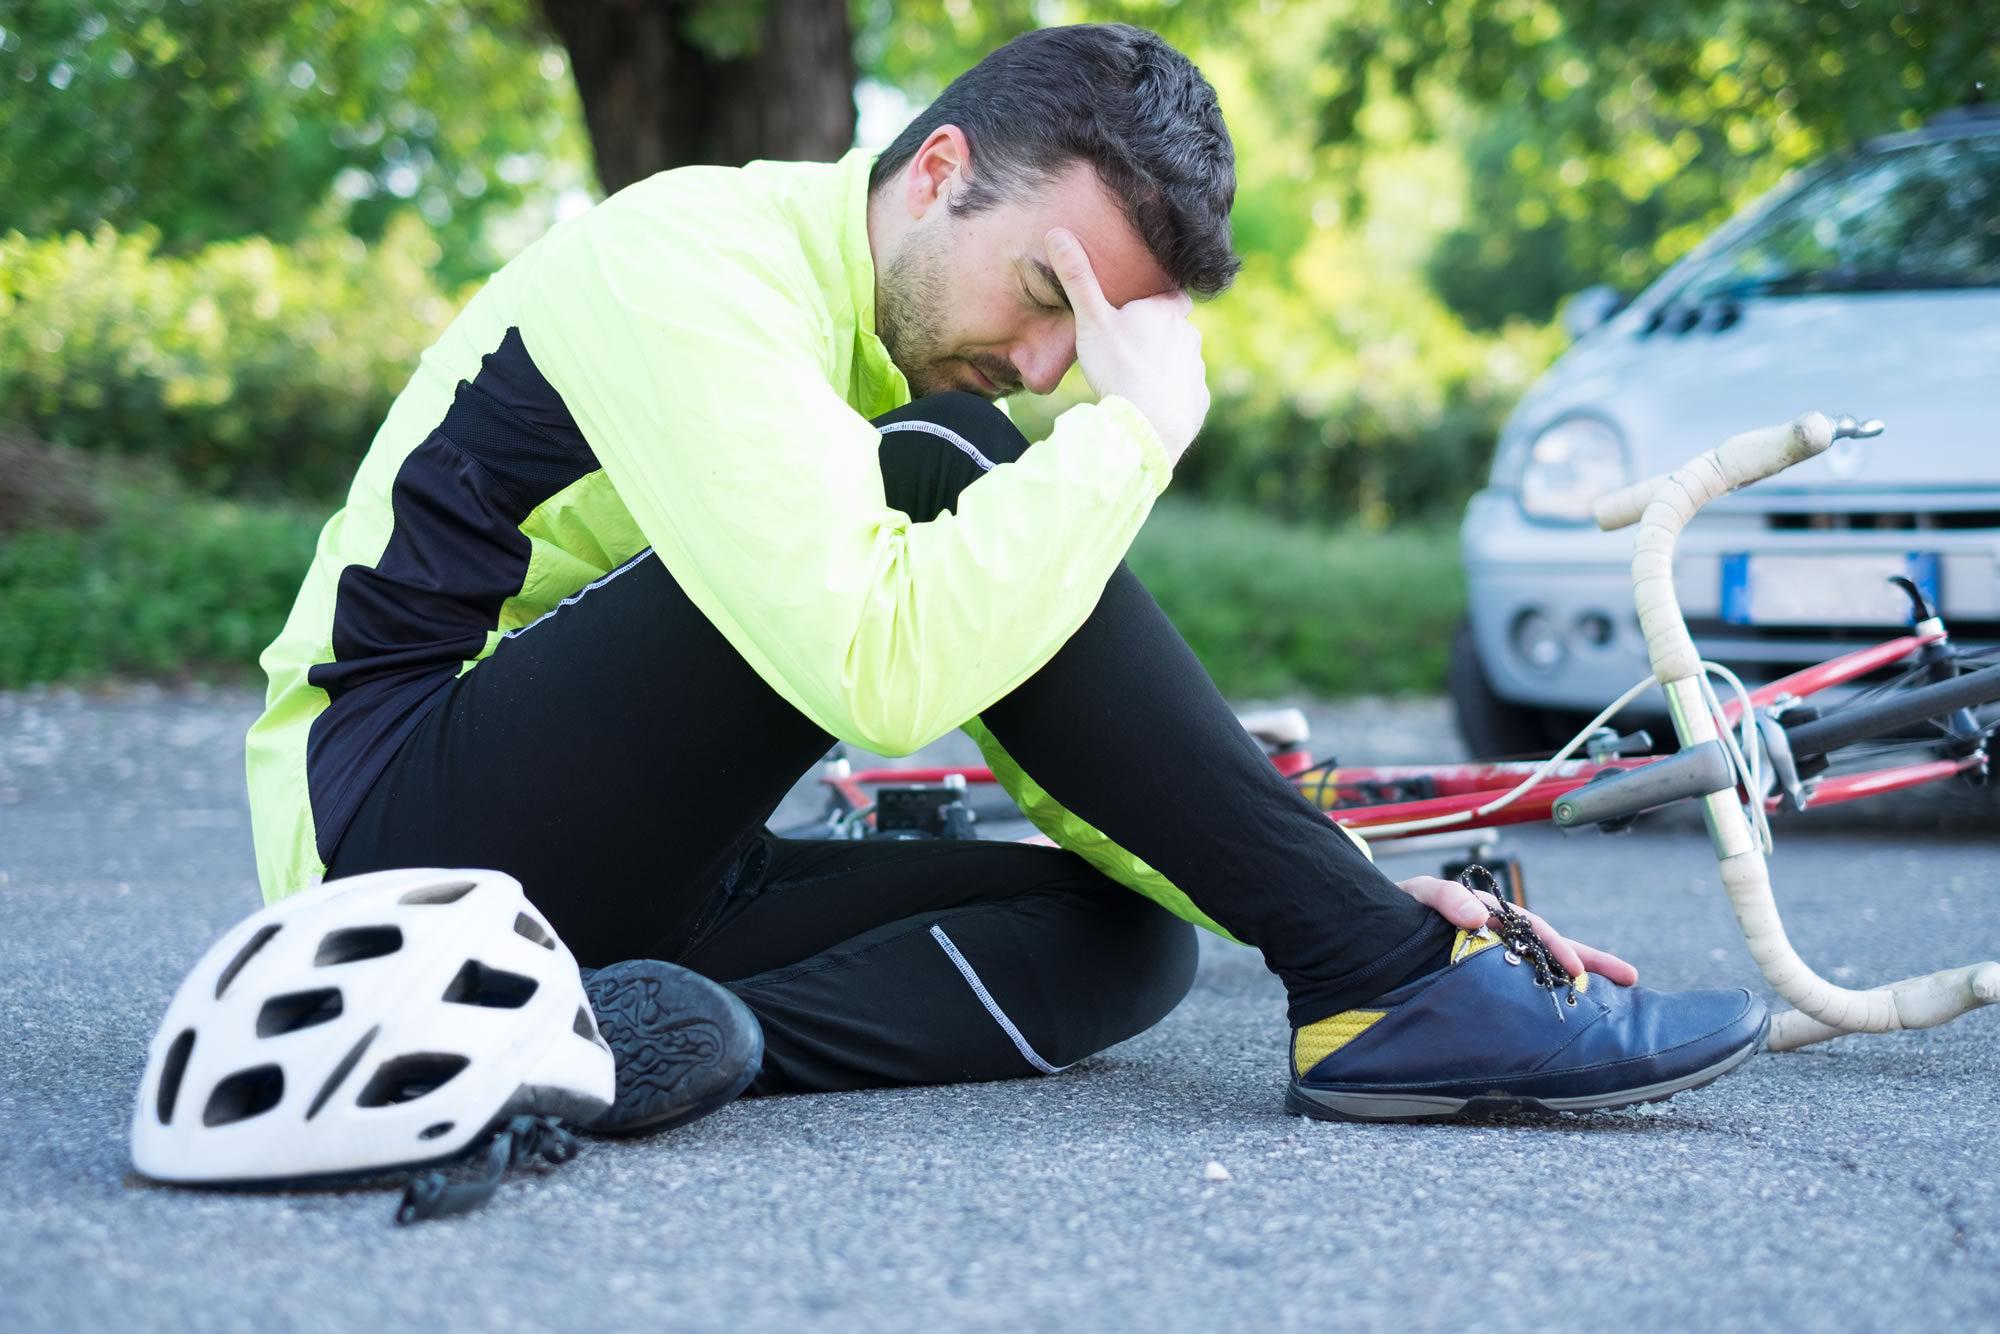 bike accident claims in Swindon - no win, no fee cycling accident compensation